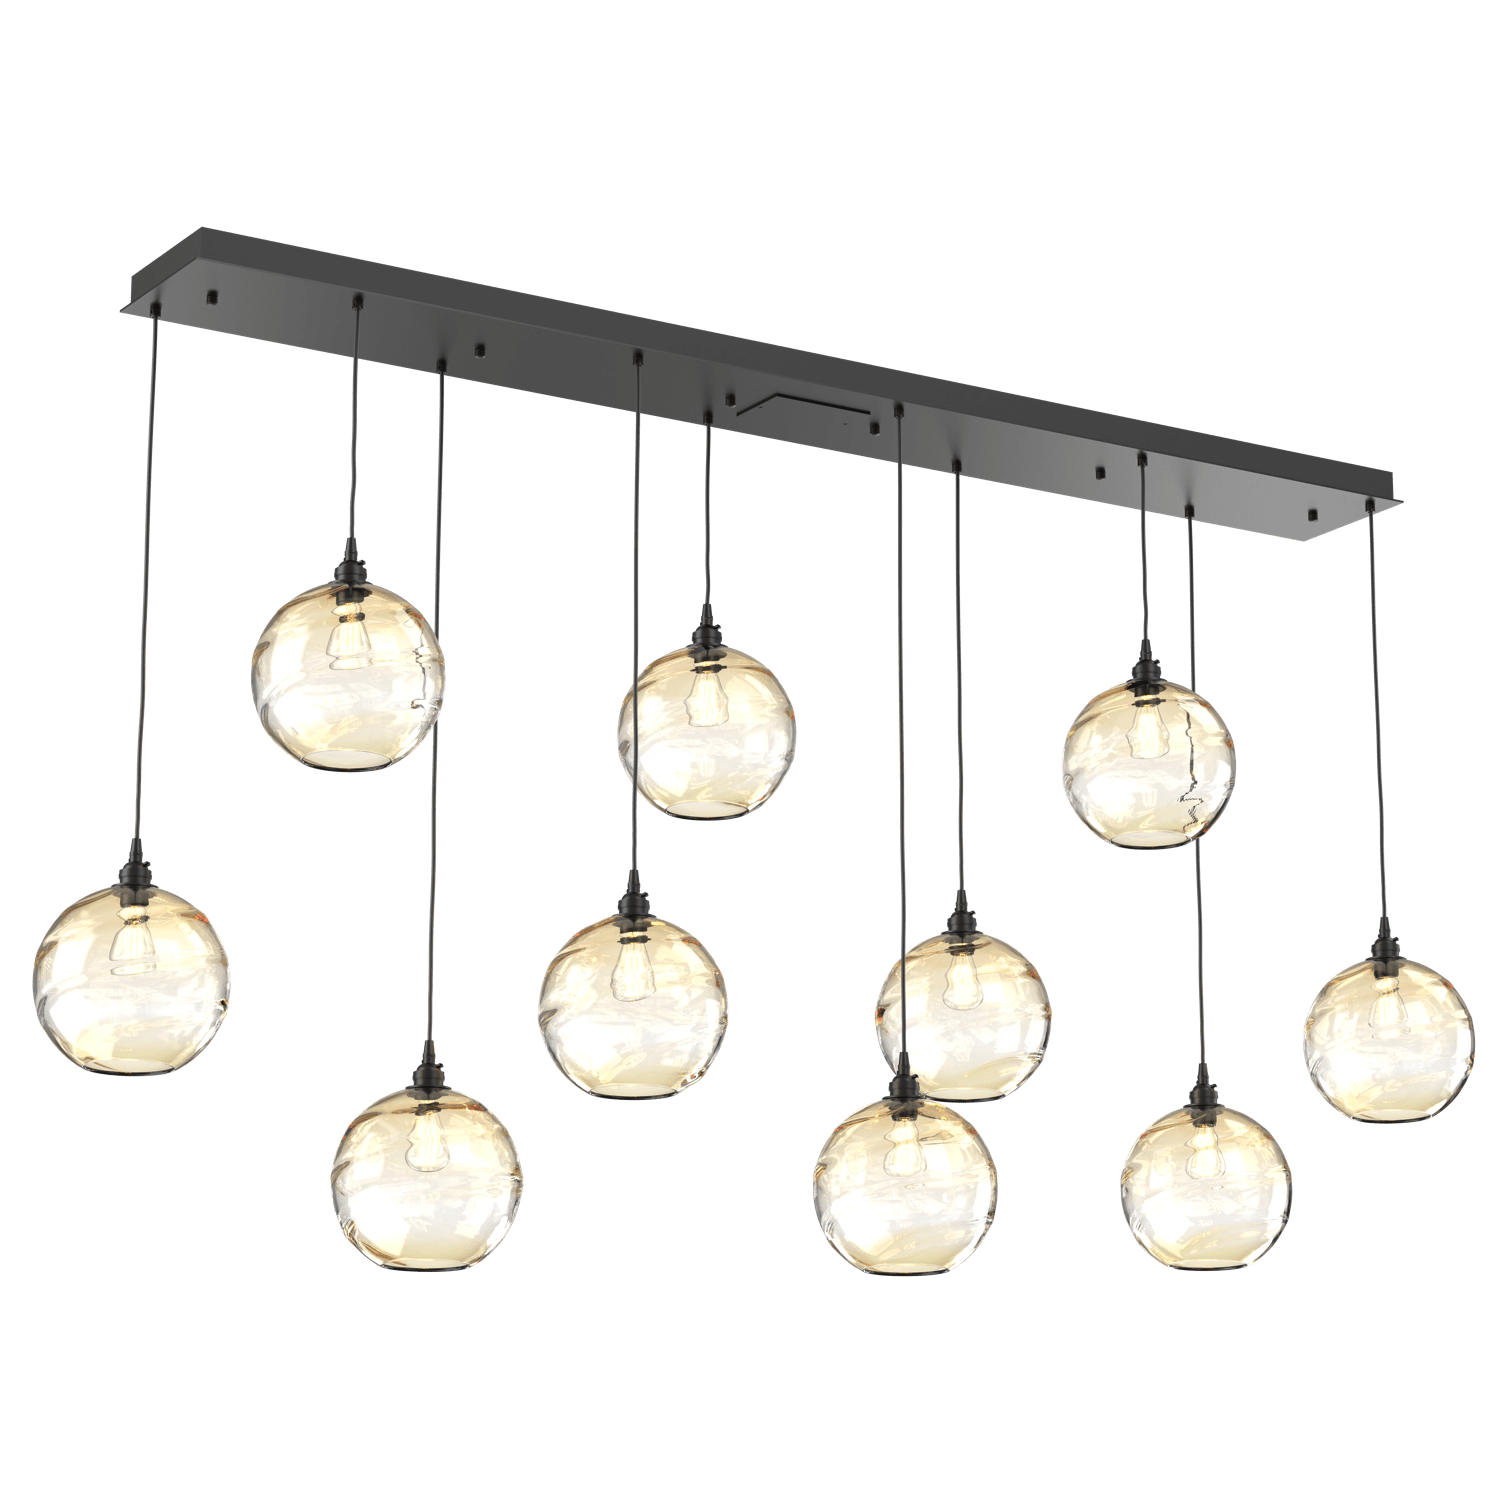 PLB0047-10-MB-OA-Hammerton-Studio-Optic-Blown-Glass-Terra-10-light-linear-pendant-chandelier-with-matte-black-finish-and-optic-amber-blown-glass-shades-and-incandescent-lamping